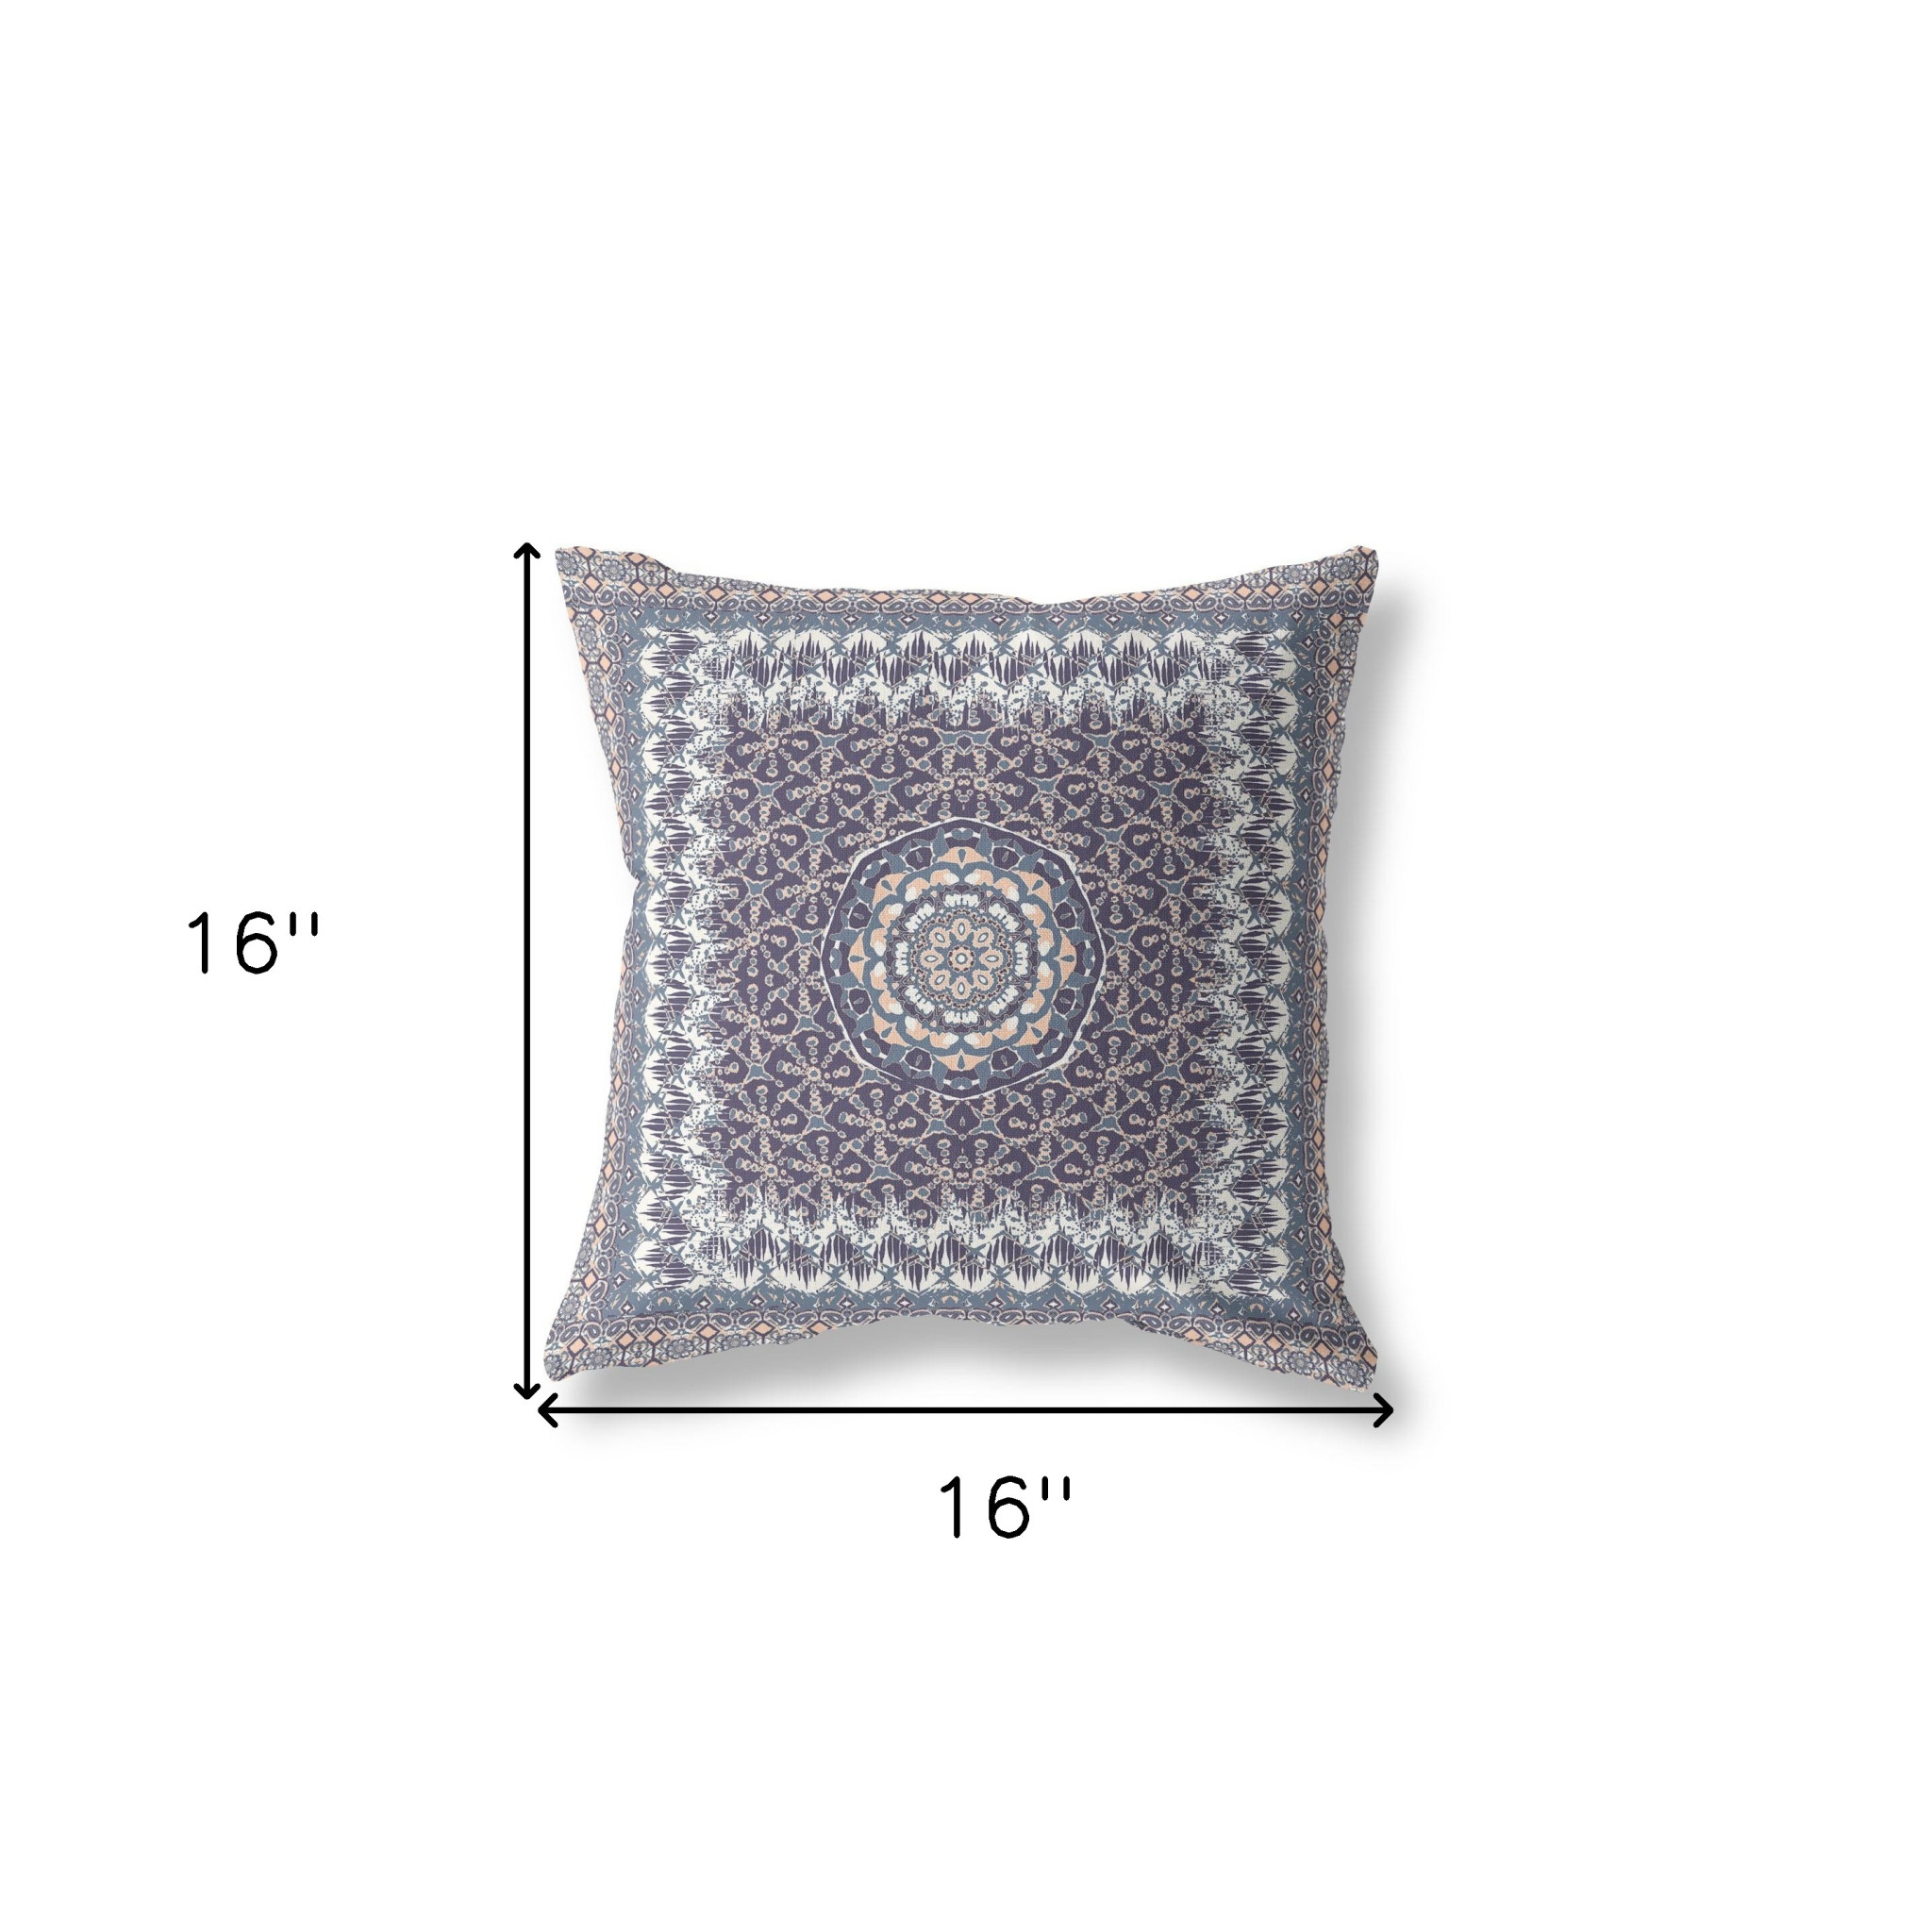 Holy Tie Die Flower Broadcloth Indoor Outdoor Blown and Closed Pillow by Amrita Sen in Indigo White